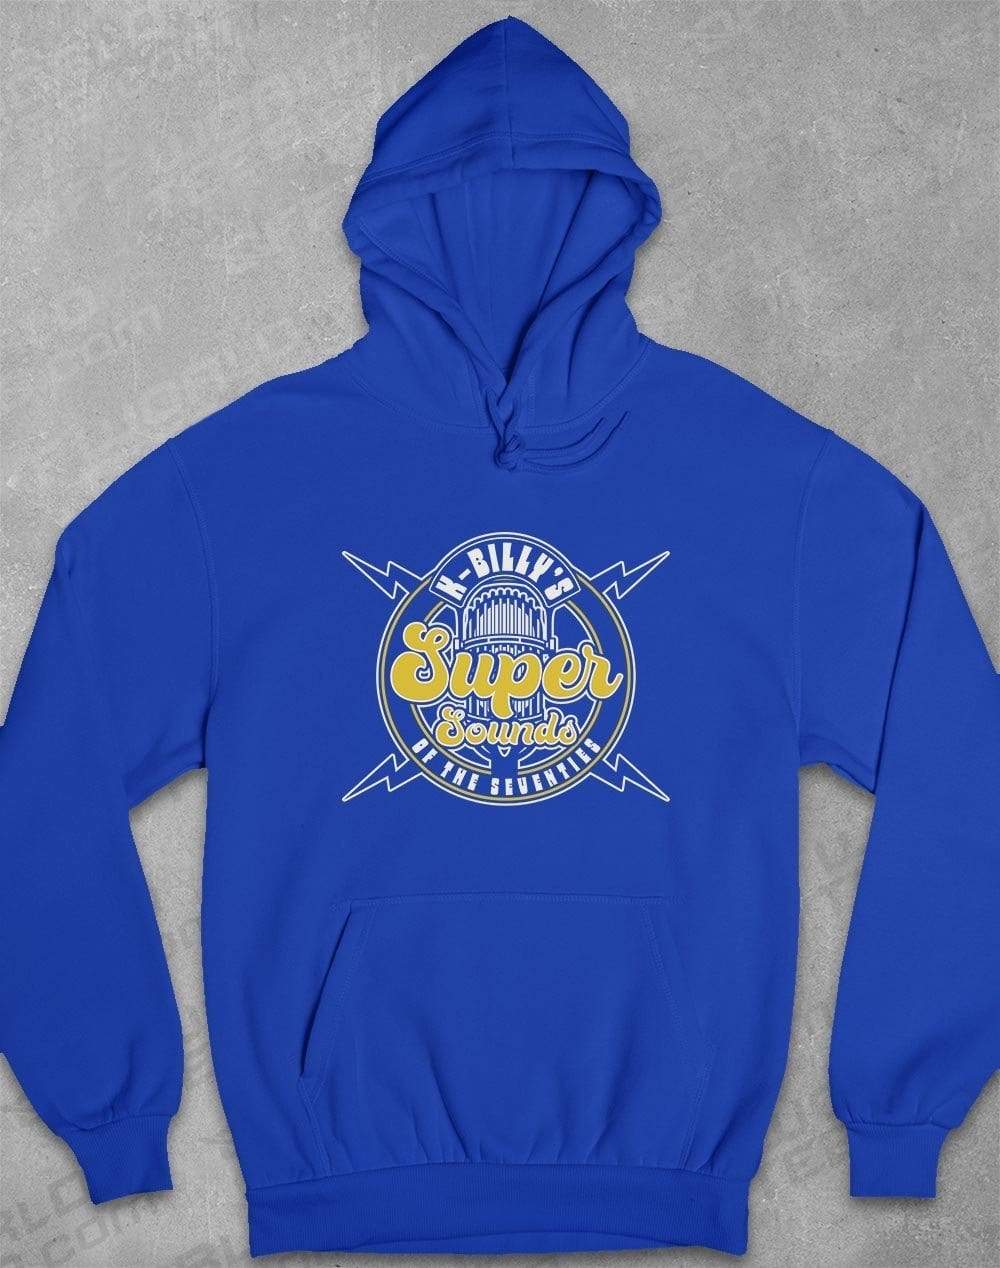 K-Billy's Super Sounds Hoodie S / Royal Blue  - Off World Tees